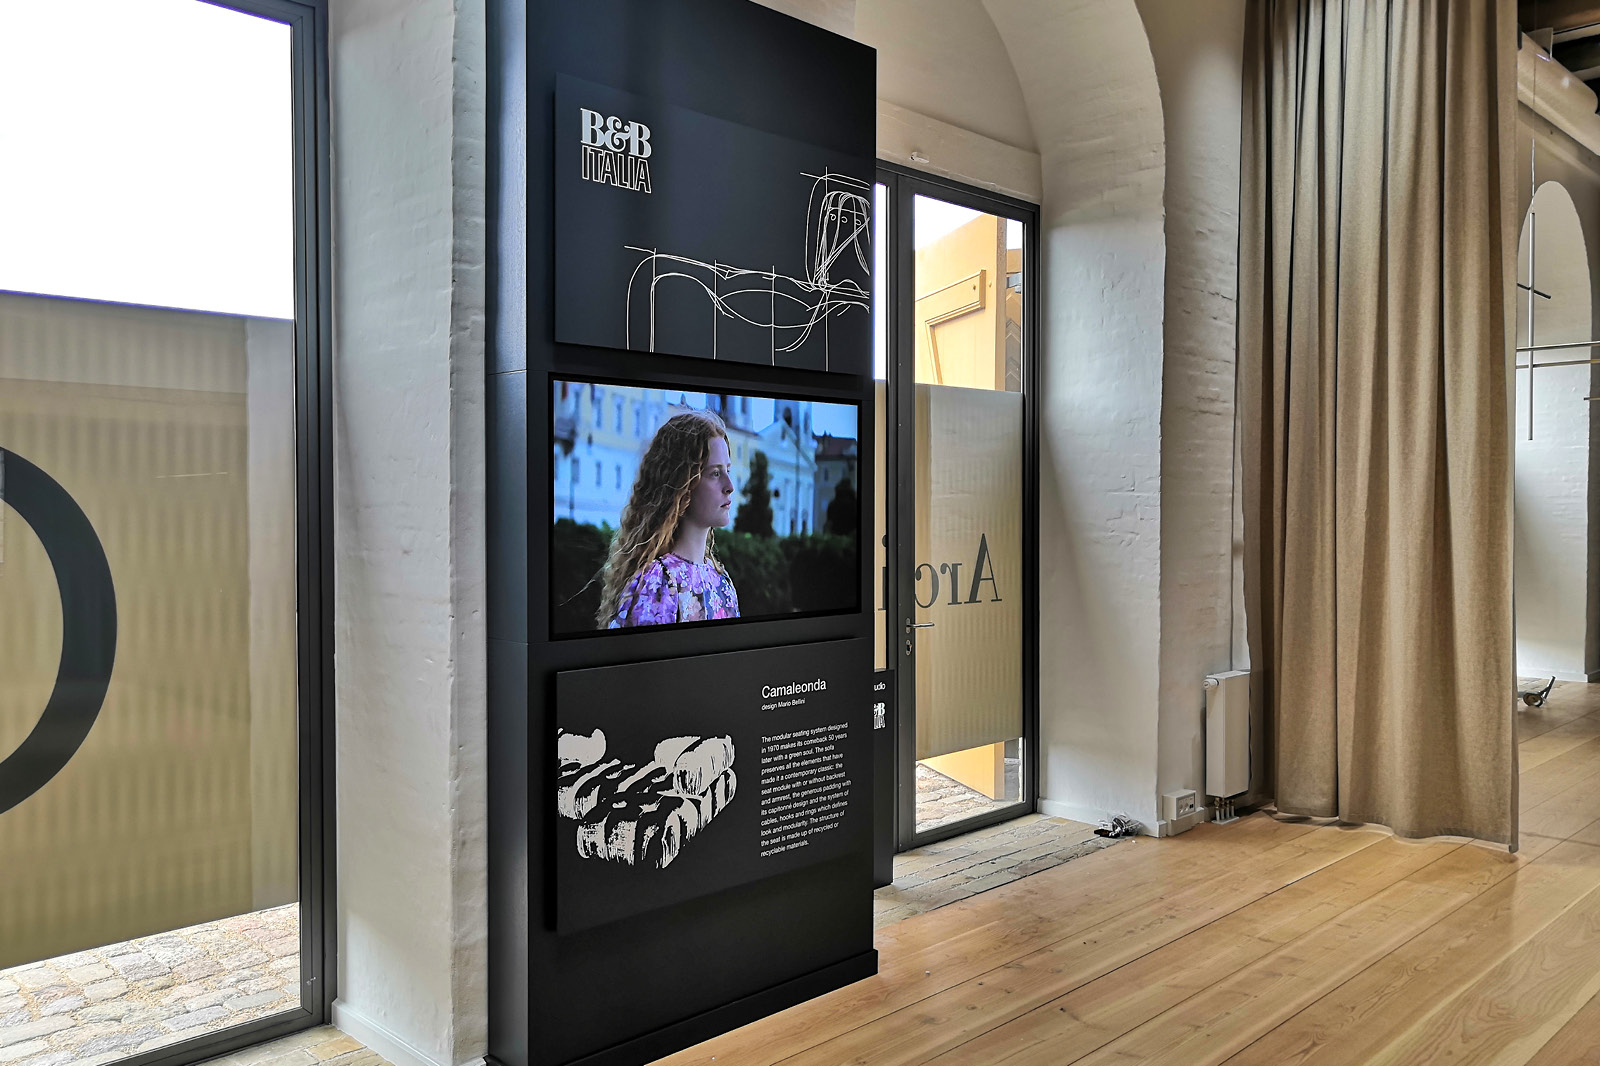 Touchwindow - The showroom as a digital environment